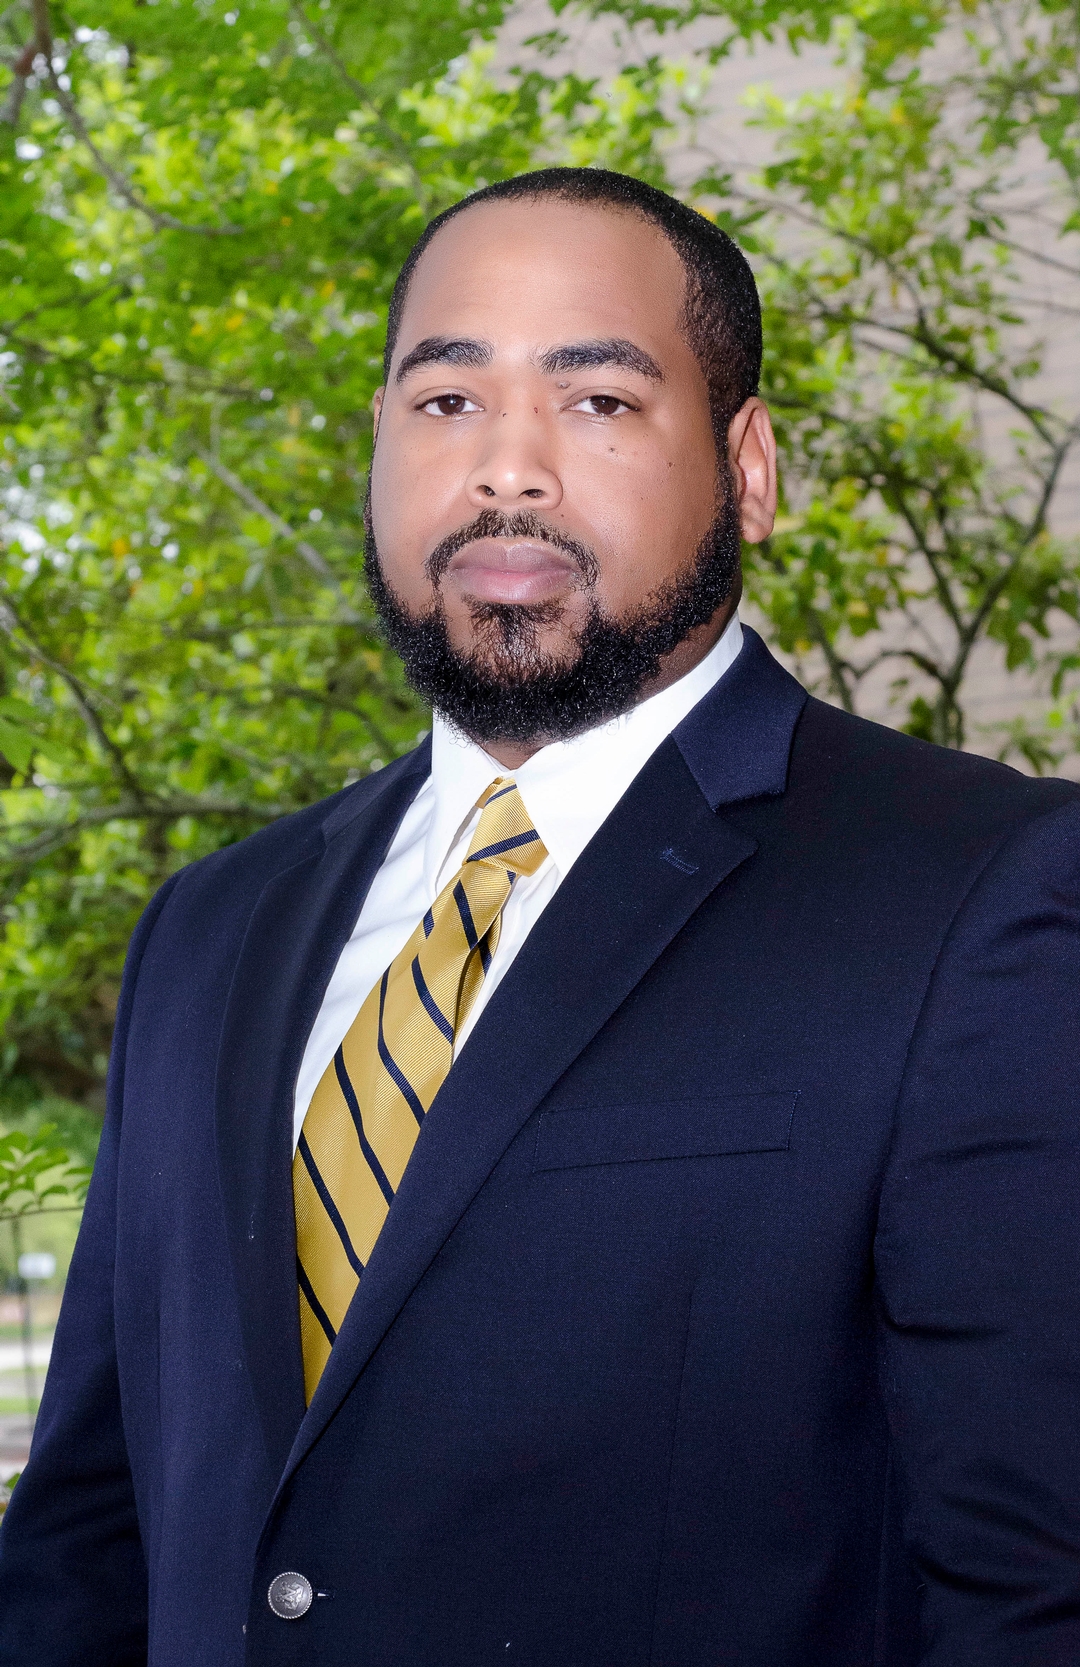 Harold Mellieon Jr., Ph.D., Appointed New Research Assistant Professor and Academic Coordinator at the SU Ag Center